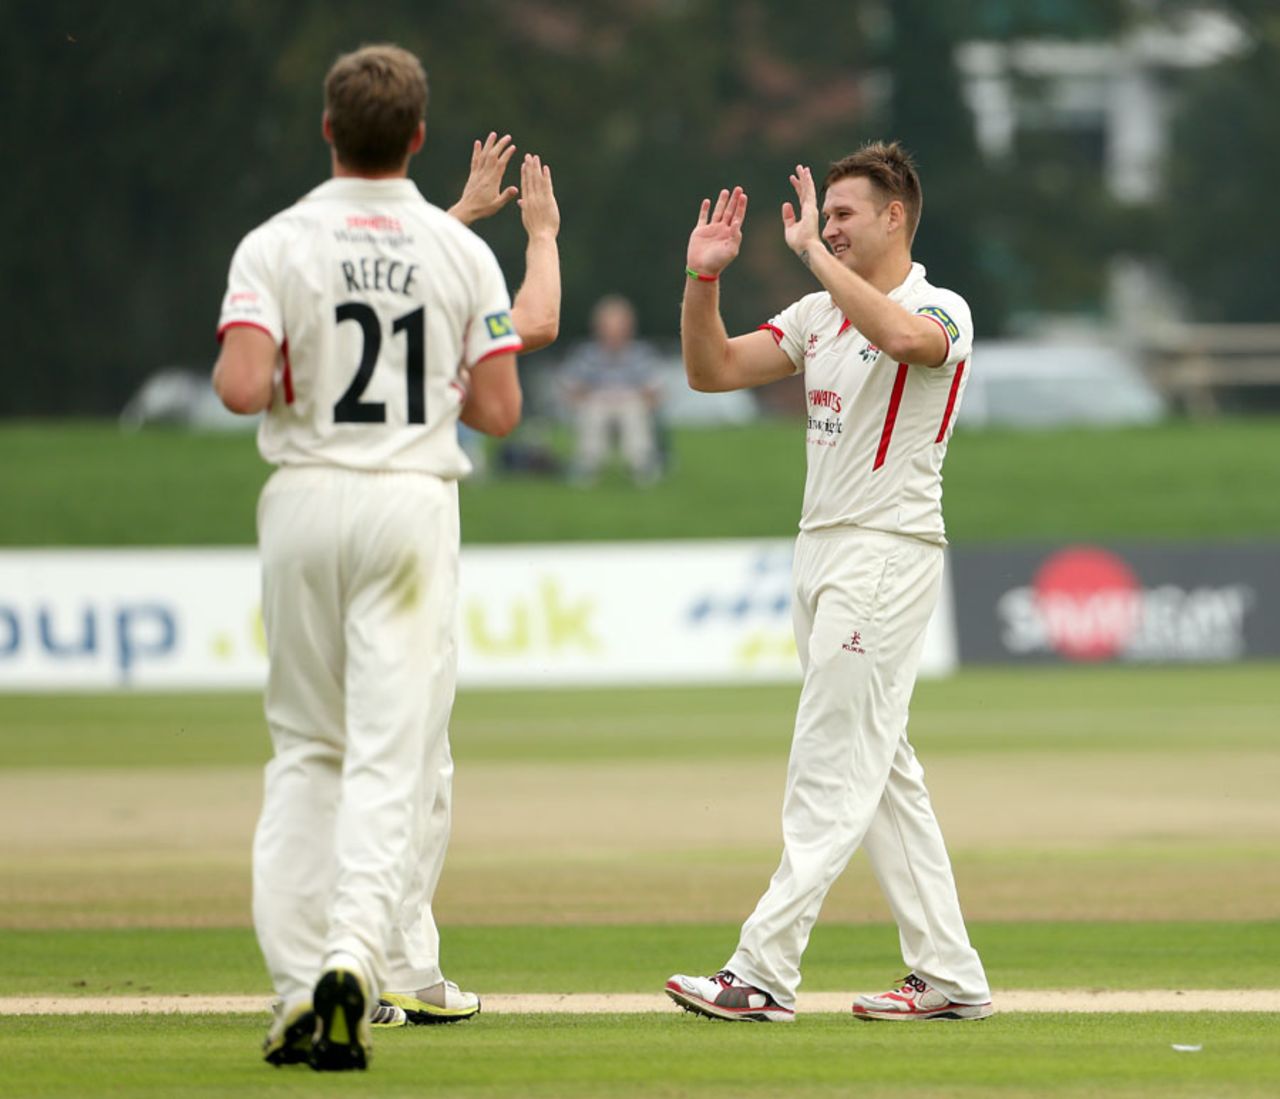 Kyle Jarvis took a wicket in his second over for Lancashire, Kent v Lancashire, County Championship, Division Two, Canterbury, 2nd day, September 25, 2013